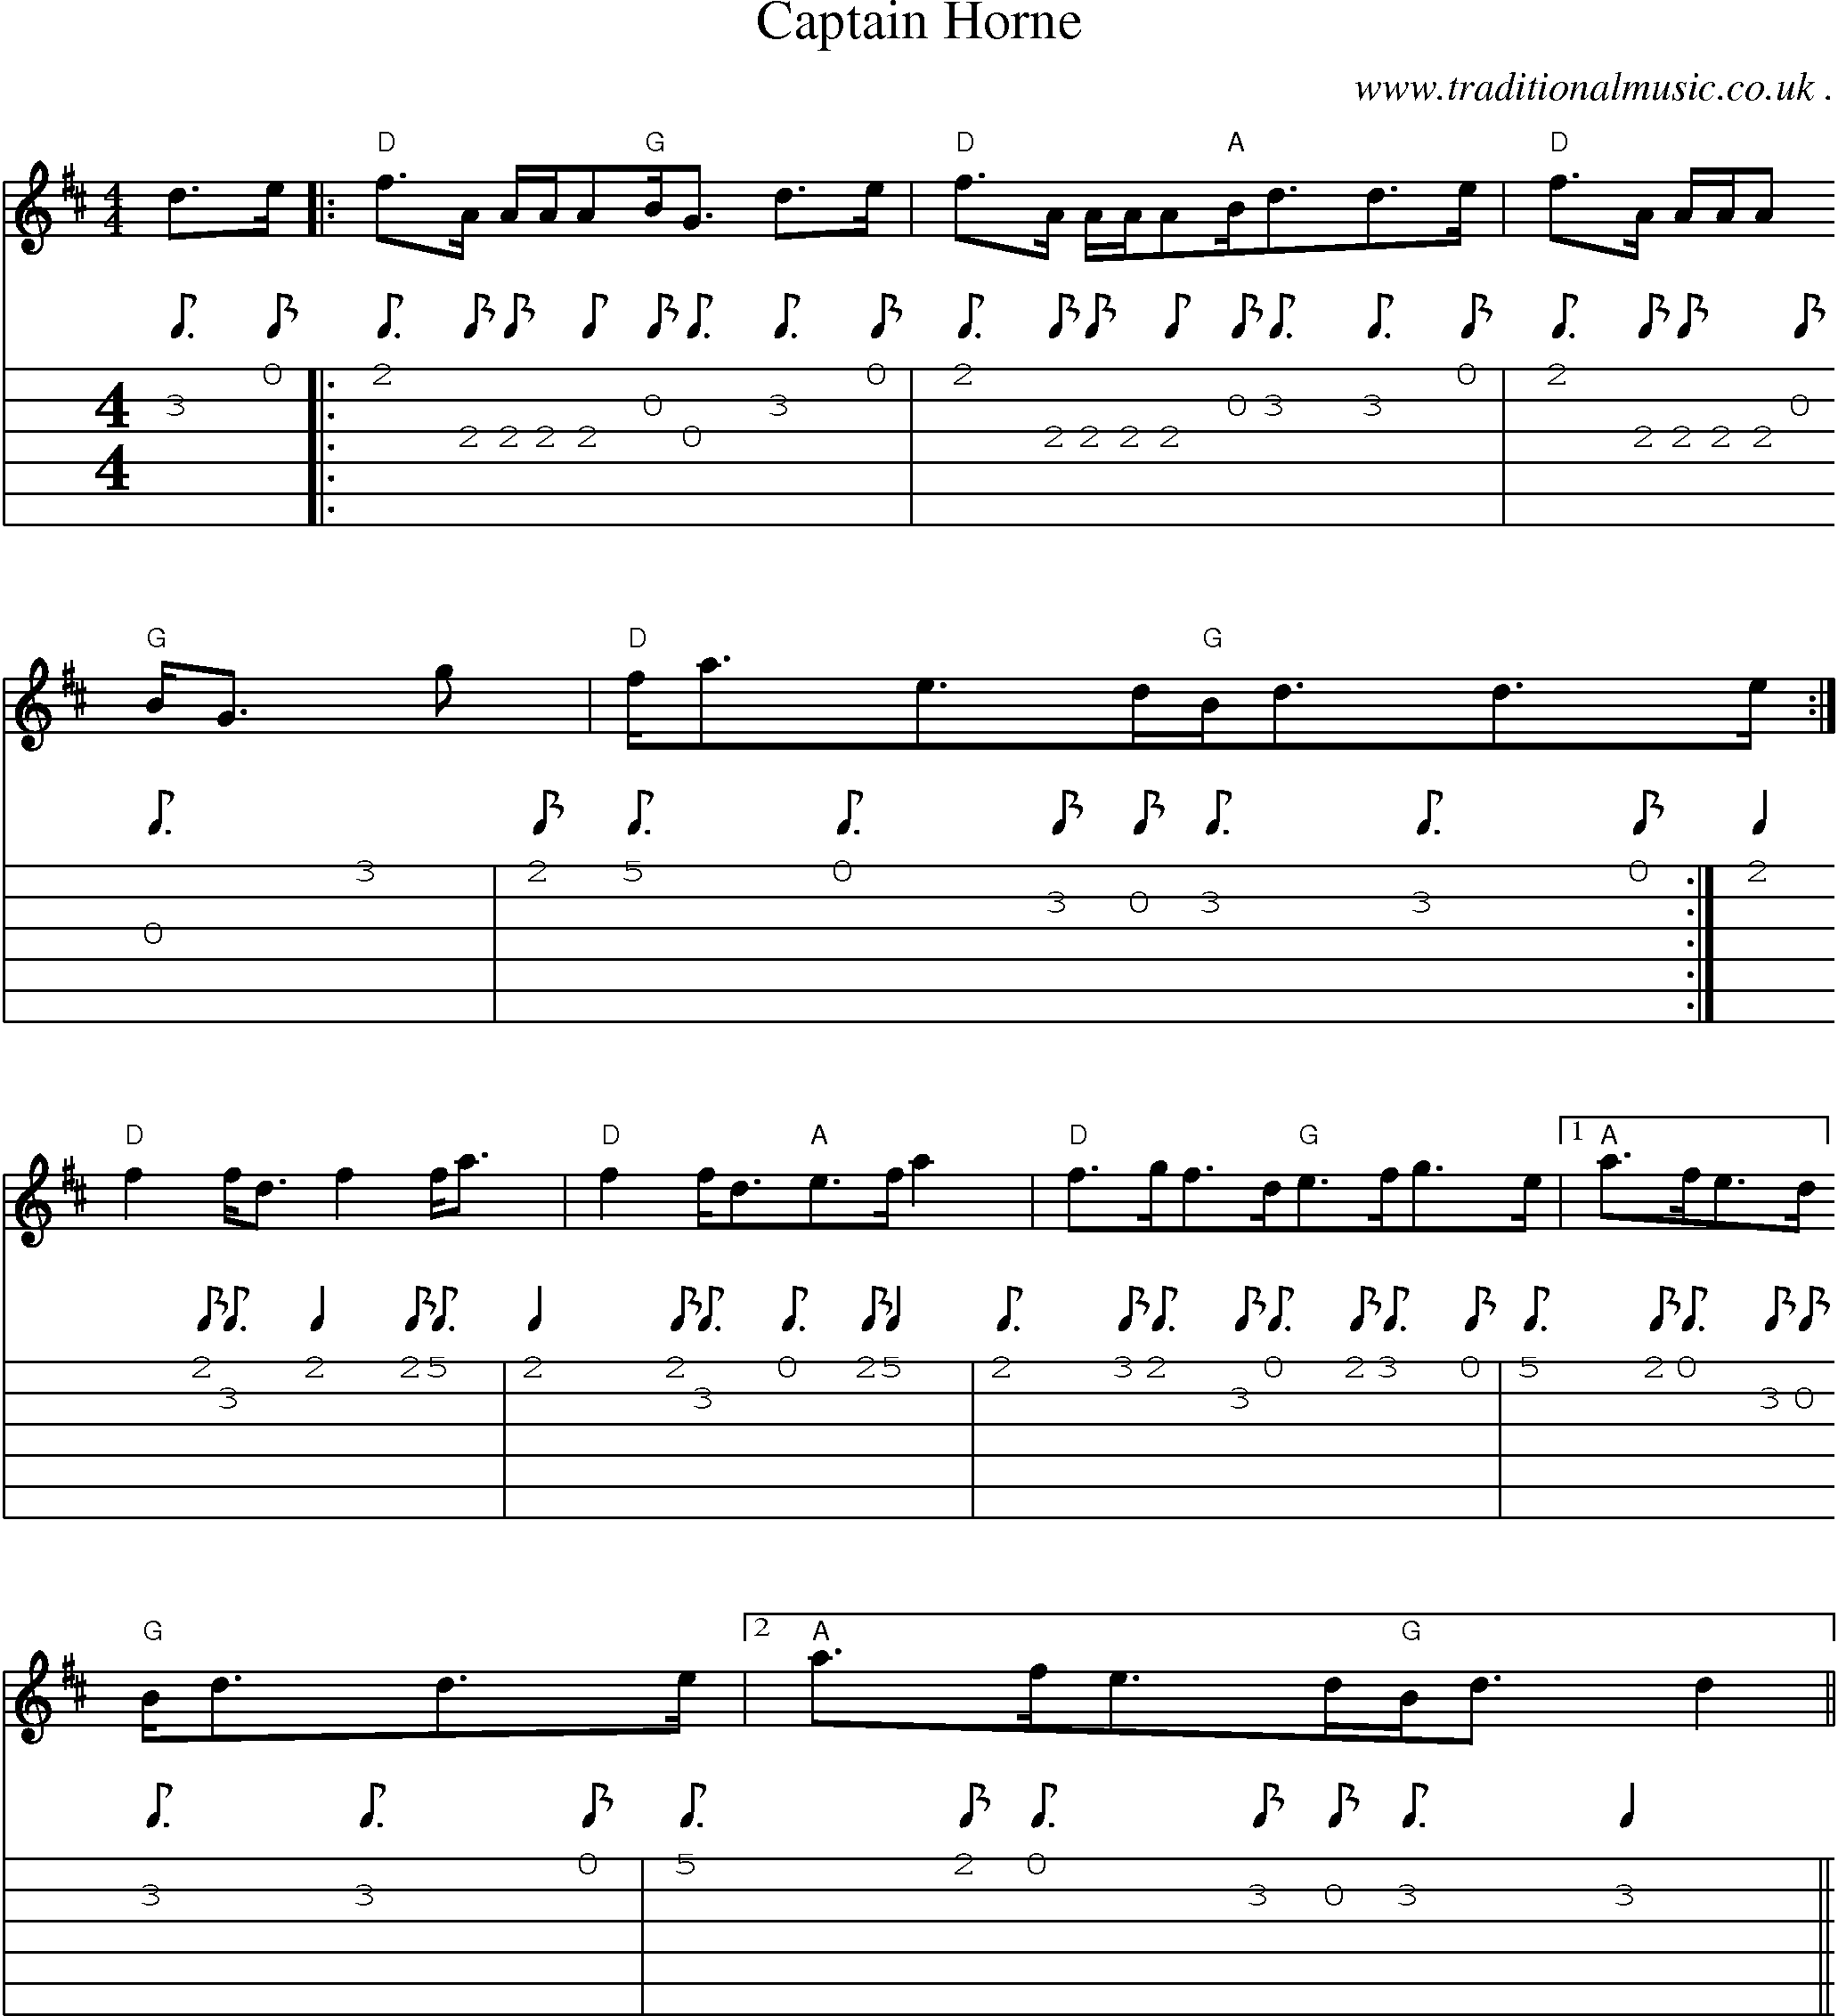 Sheet-Music and Guitar Tabs for Captain Horne